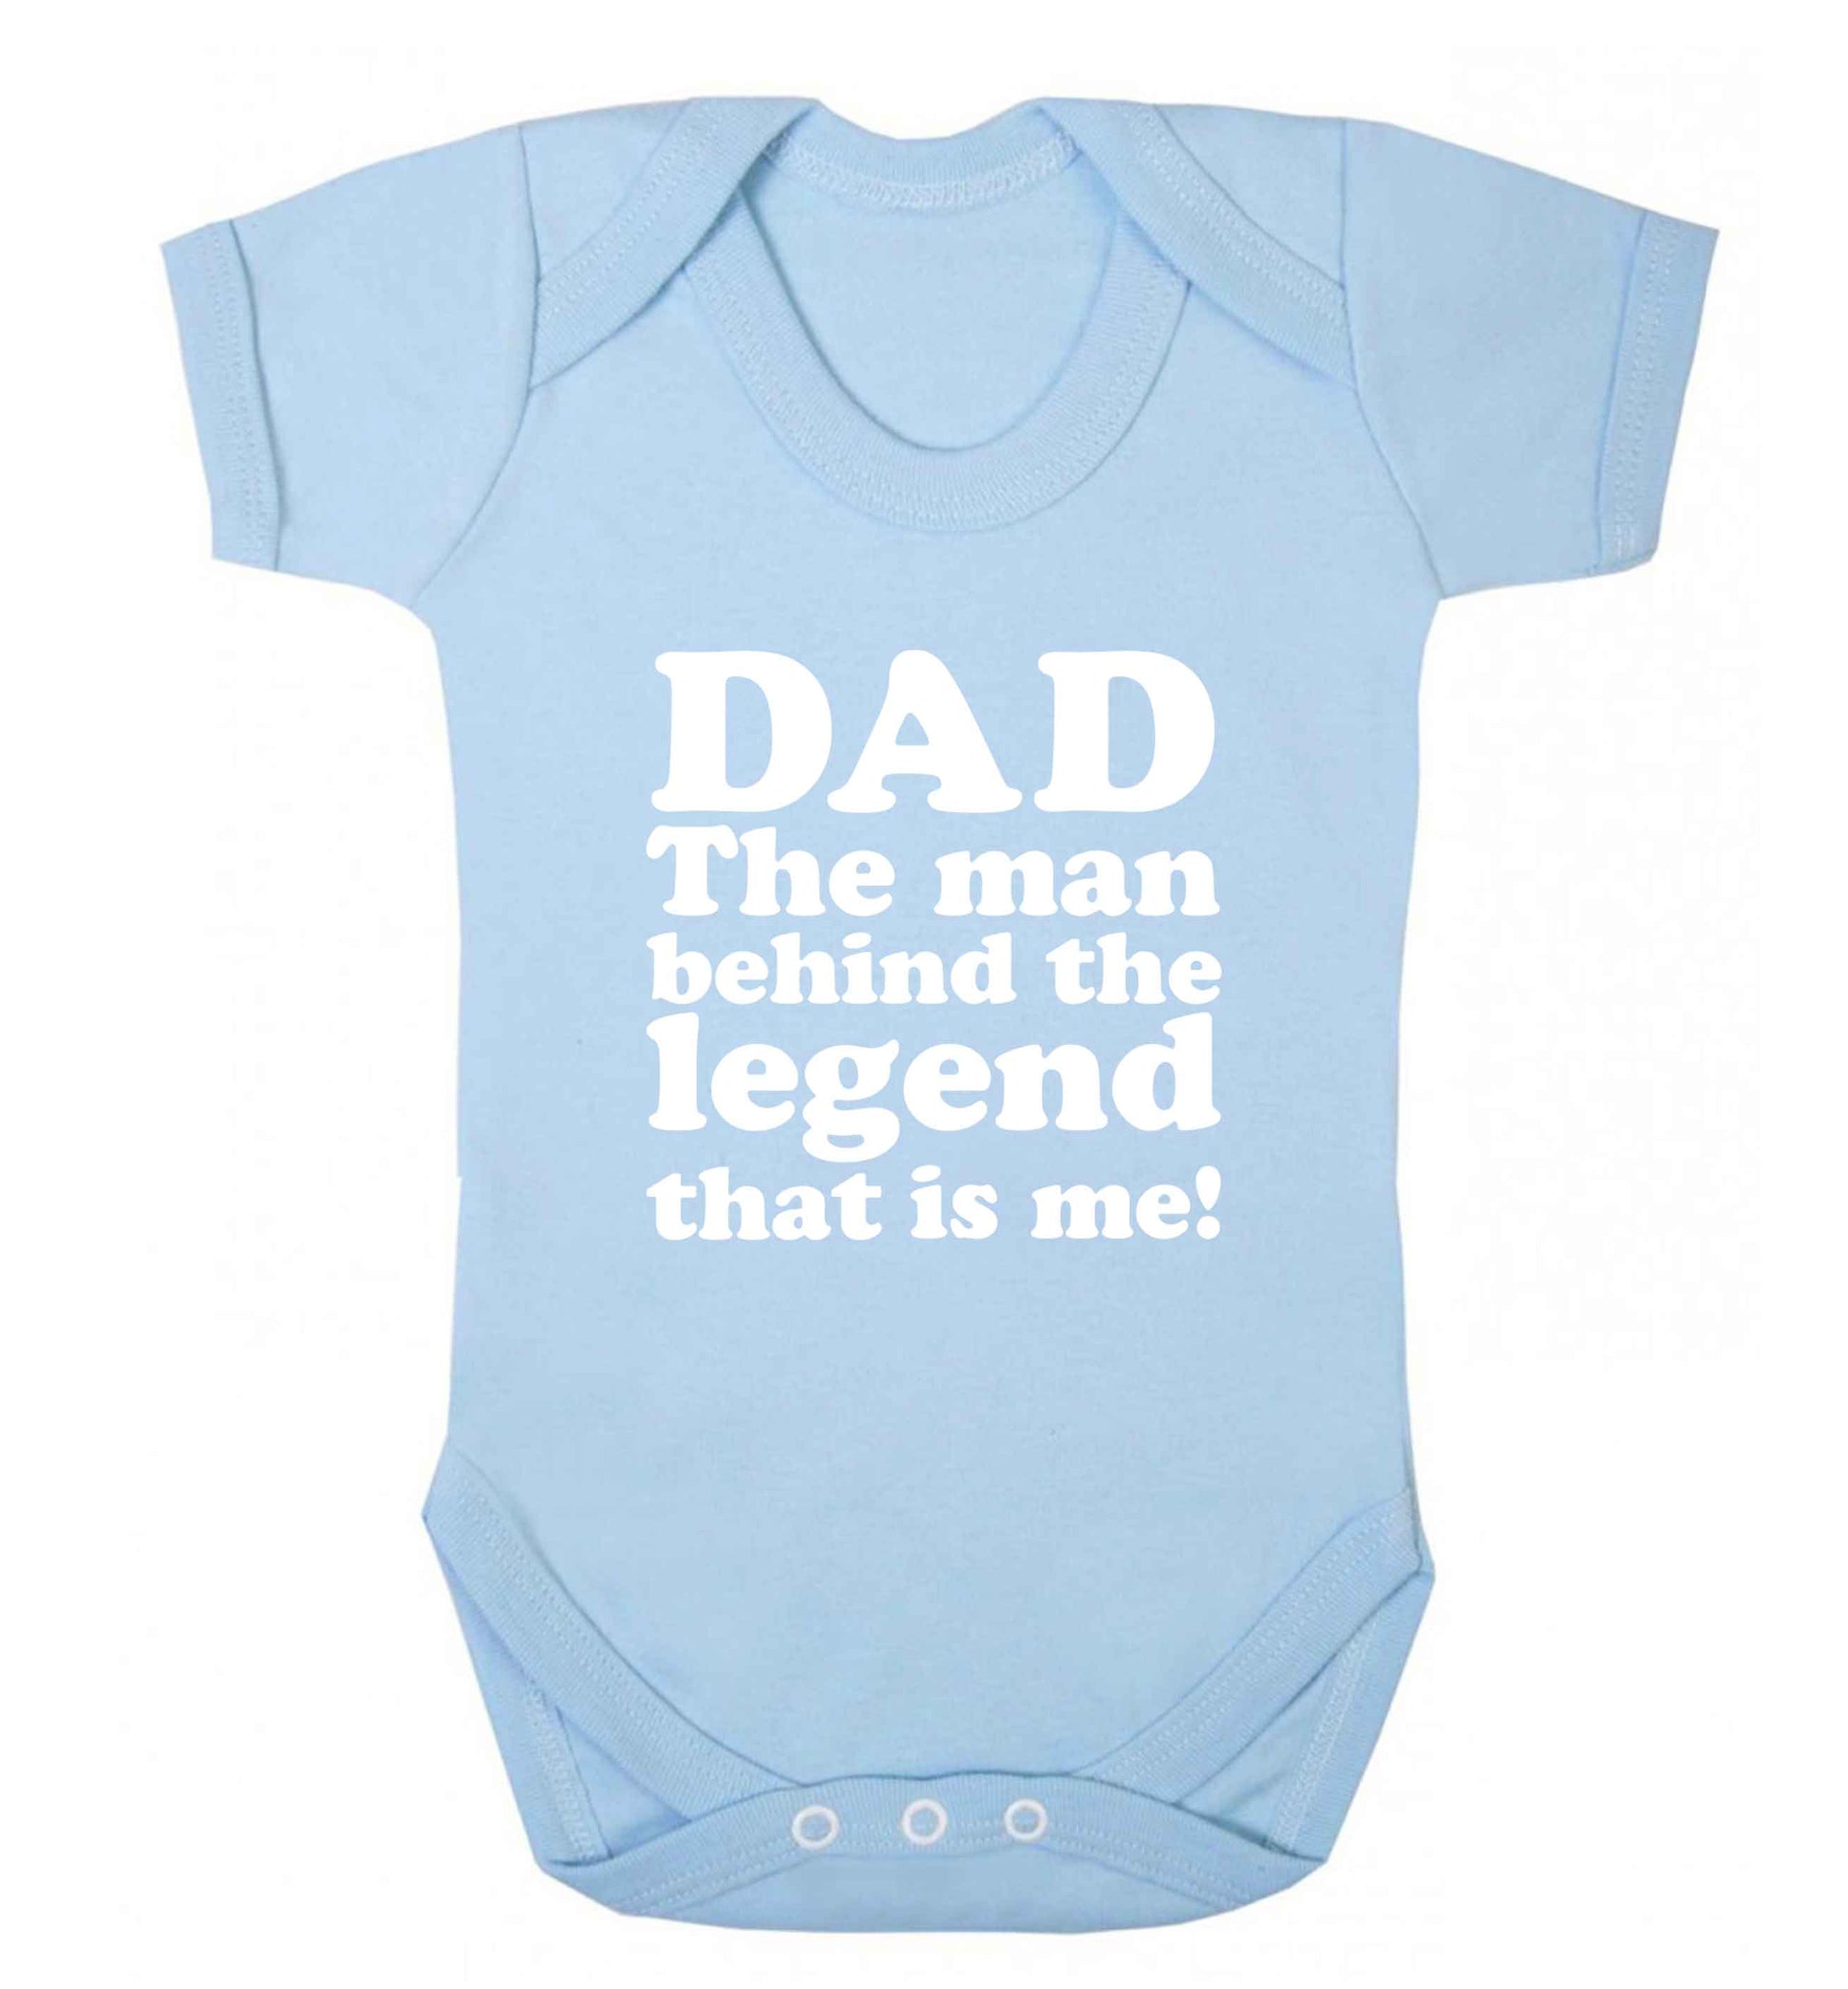 Dad the man behind the legend that is me baby vest pale blue 18-24 months